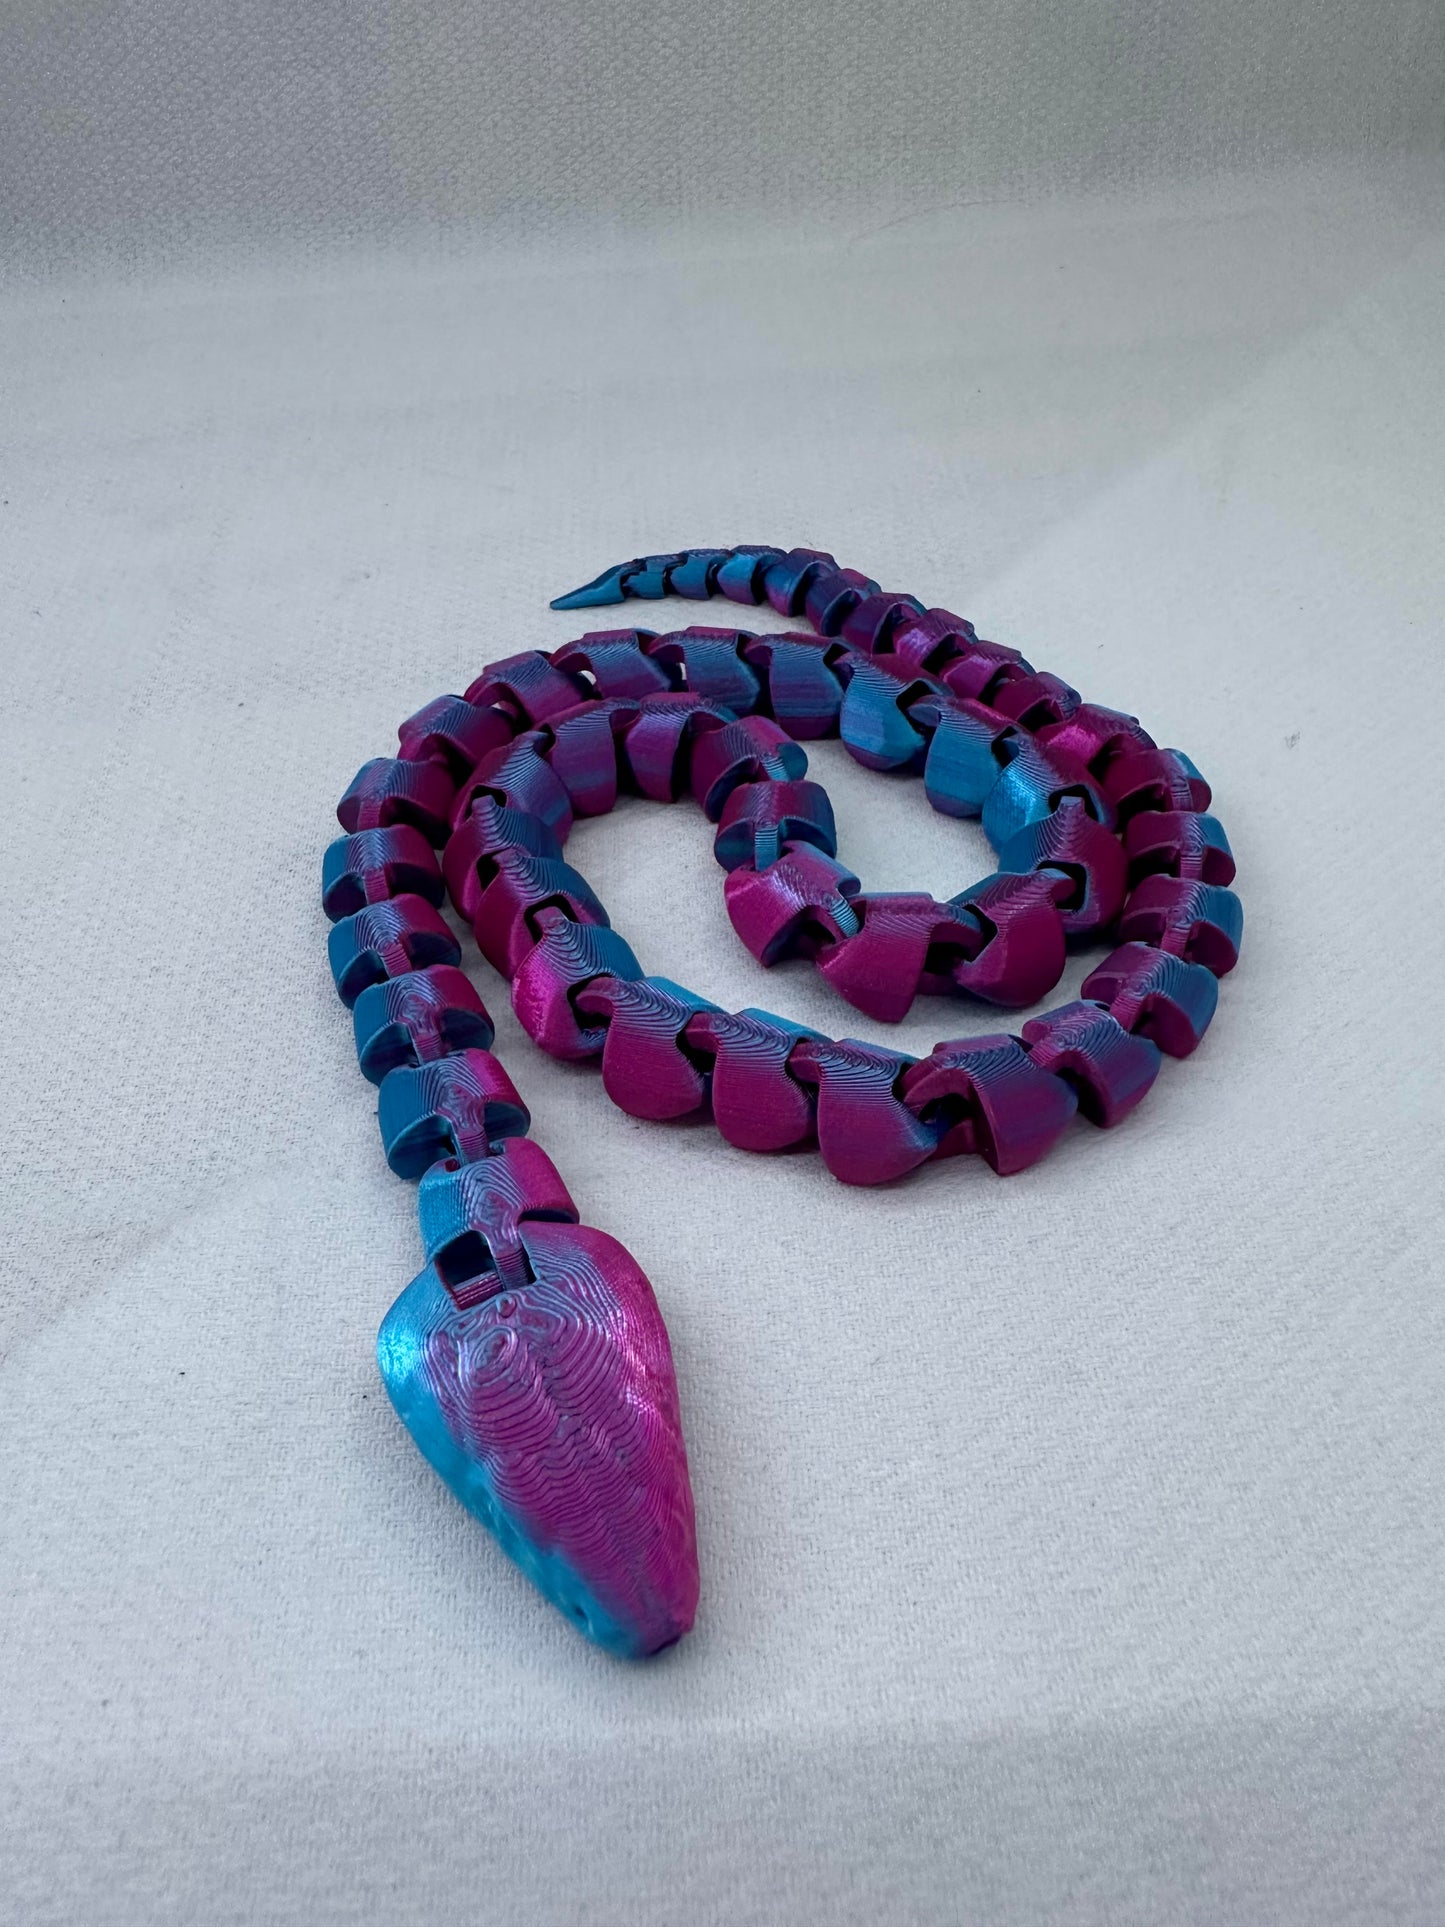 3D Printed Articulated Snake, Fidget Toy